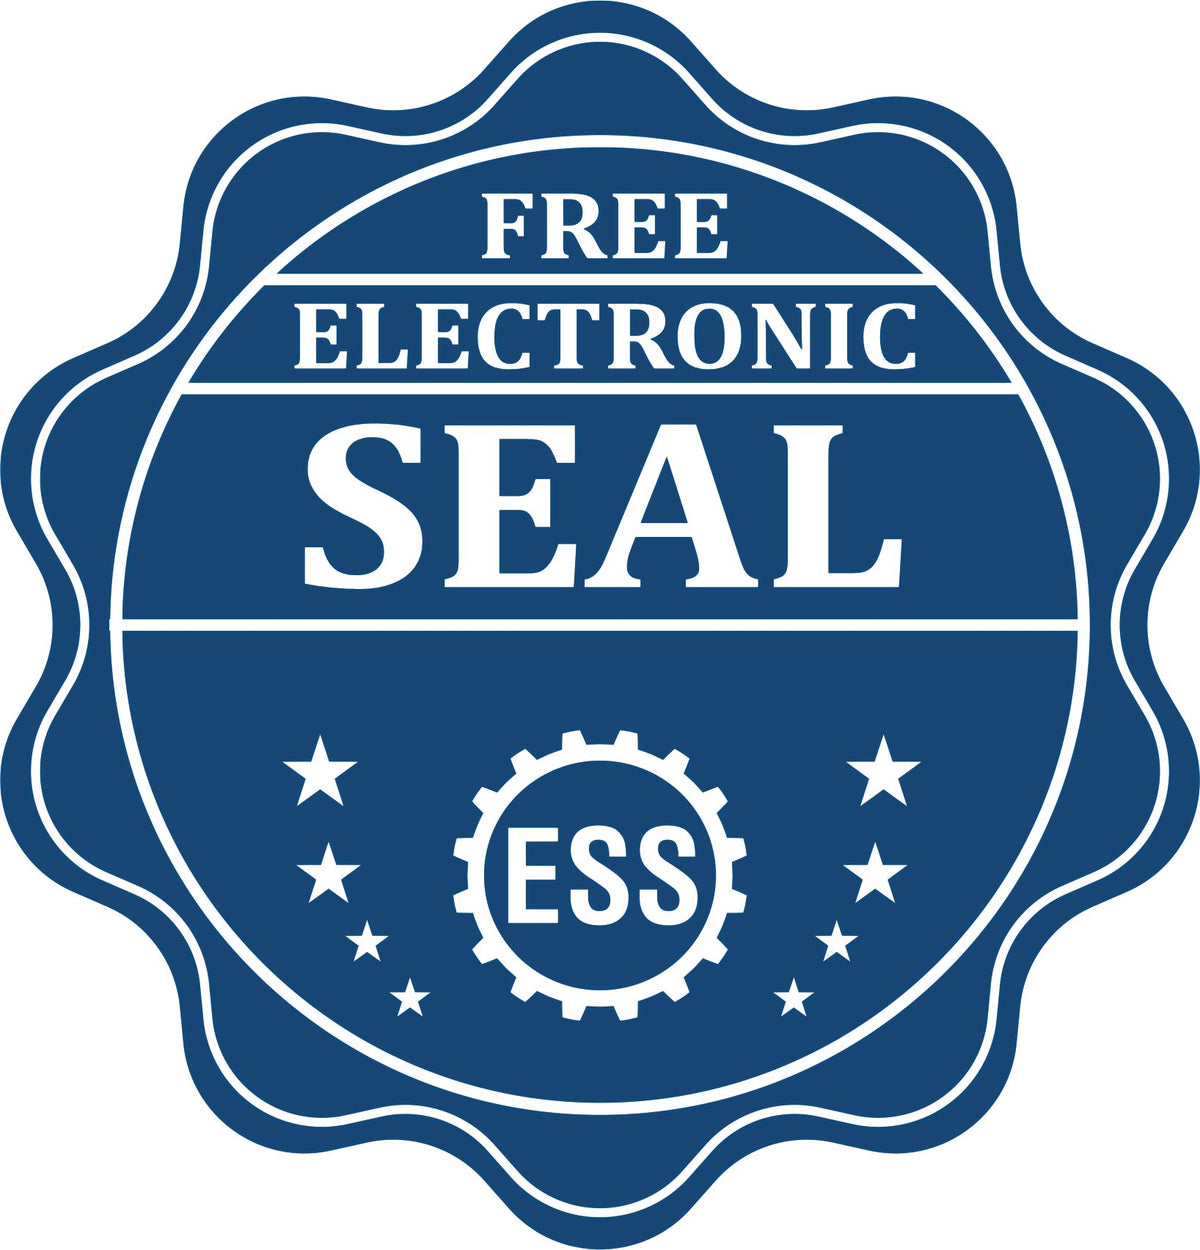 A badge showing a free electronic seal for the Slim Pre-Inked Maine Landscape Architect Seal Stamp with stars and the ESS gear on the emblem.